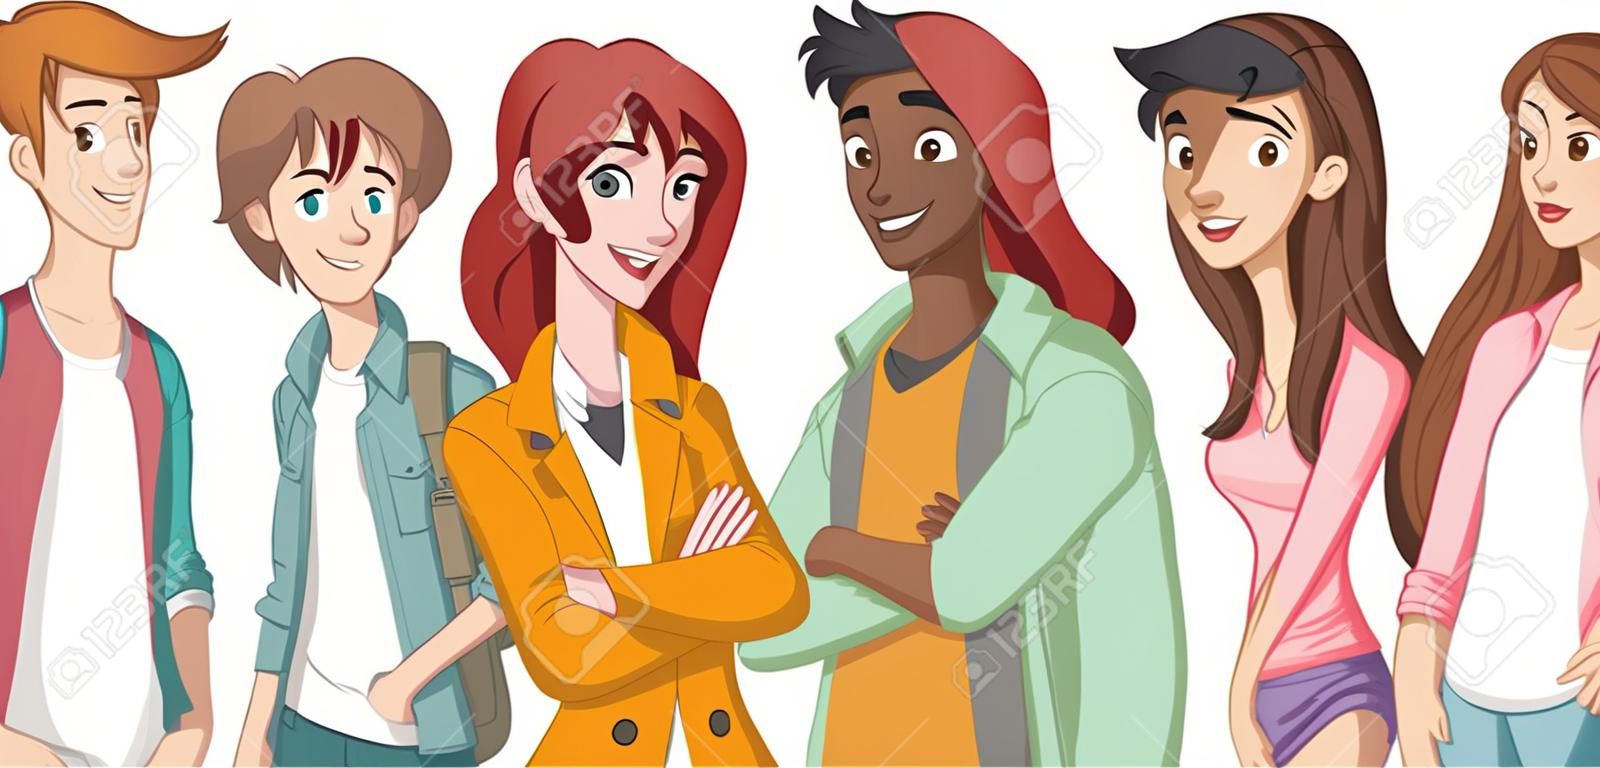 Group of cartoon young people. Teenagers